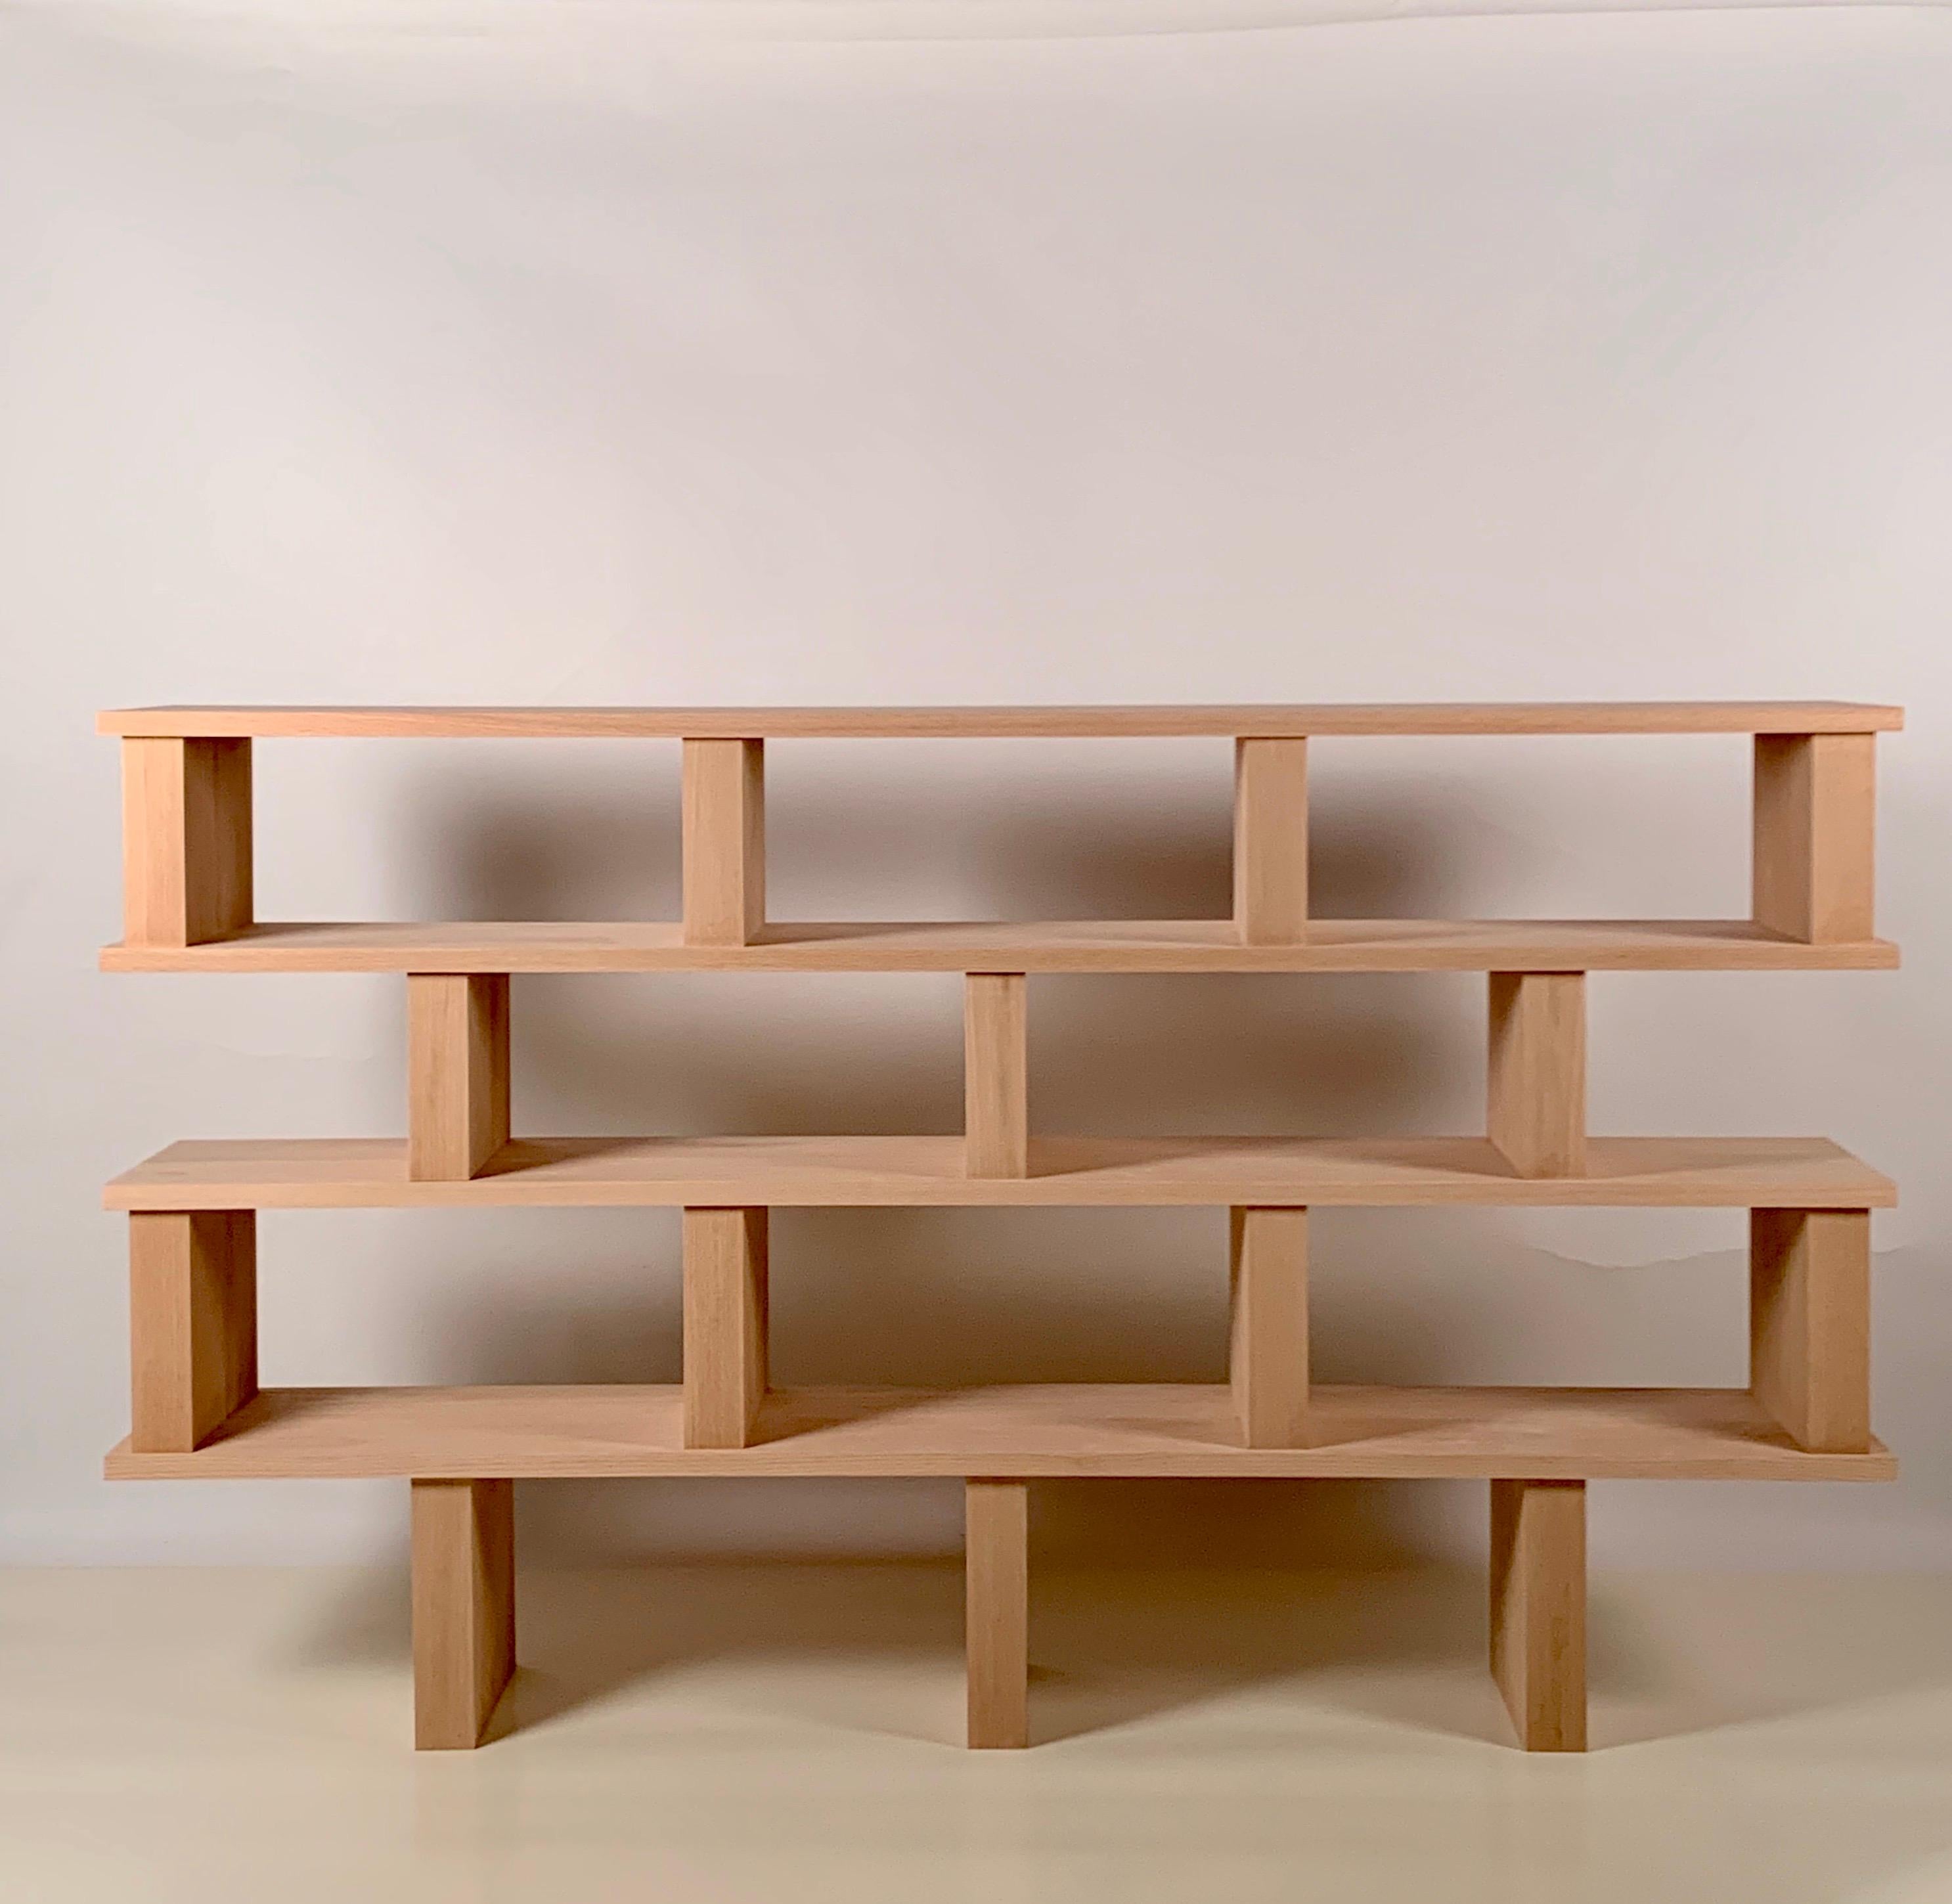 Four shelves 'Verticale' polished oak shelving unit.

Highest quality solid oak construction.

Comes in 2 parts connected with dowels, for easy shipping, installation and moving.